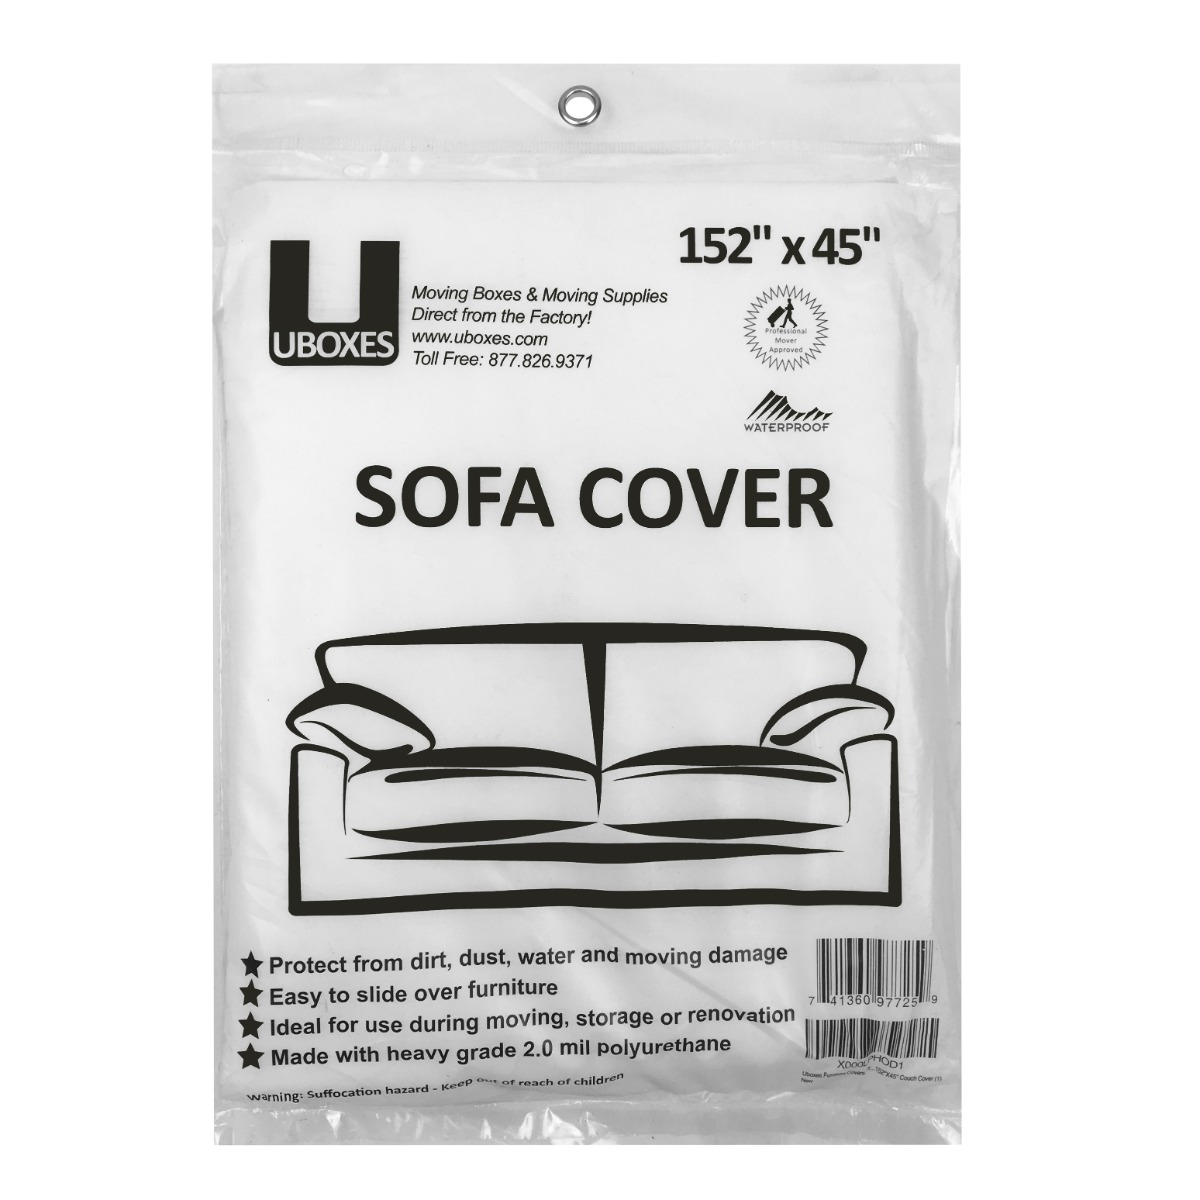 UBMOVE 13 Sofa Covers 152" x 45&quot; Poly Bags for Protective Moving Storage